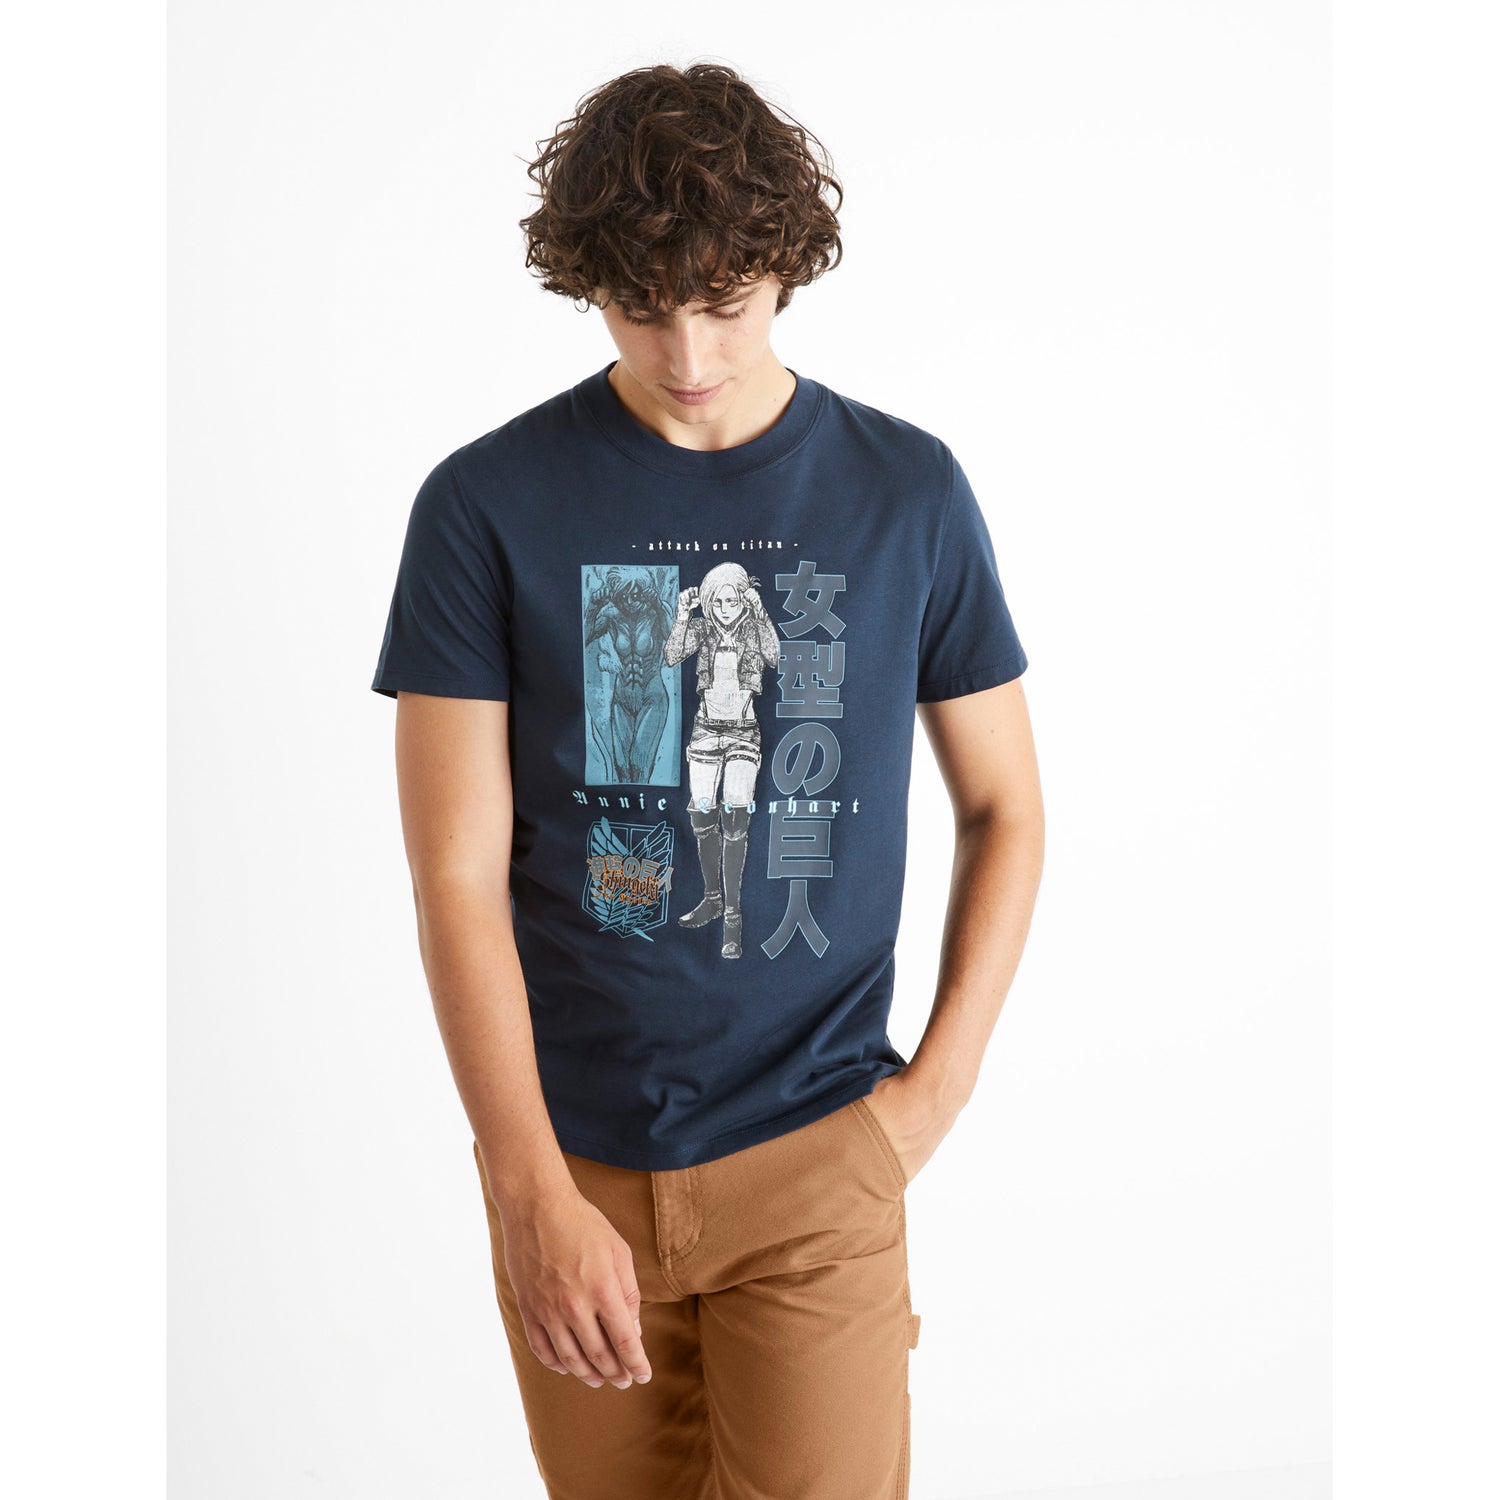 Attack on Titan - Navy Printed Tshirt (LCEAOT1)